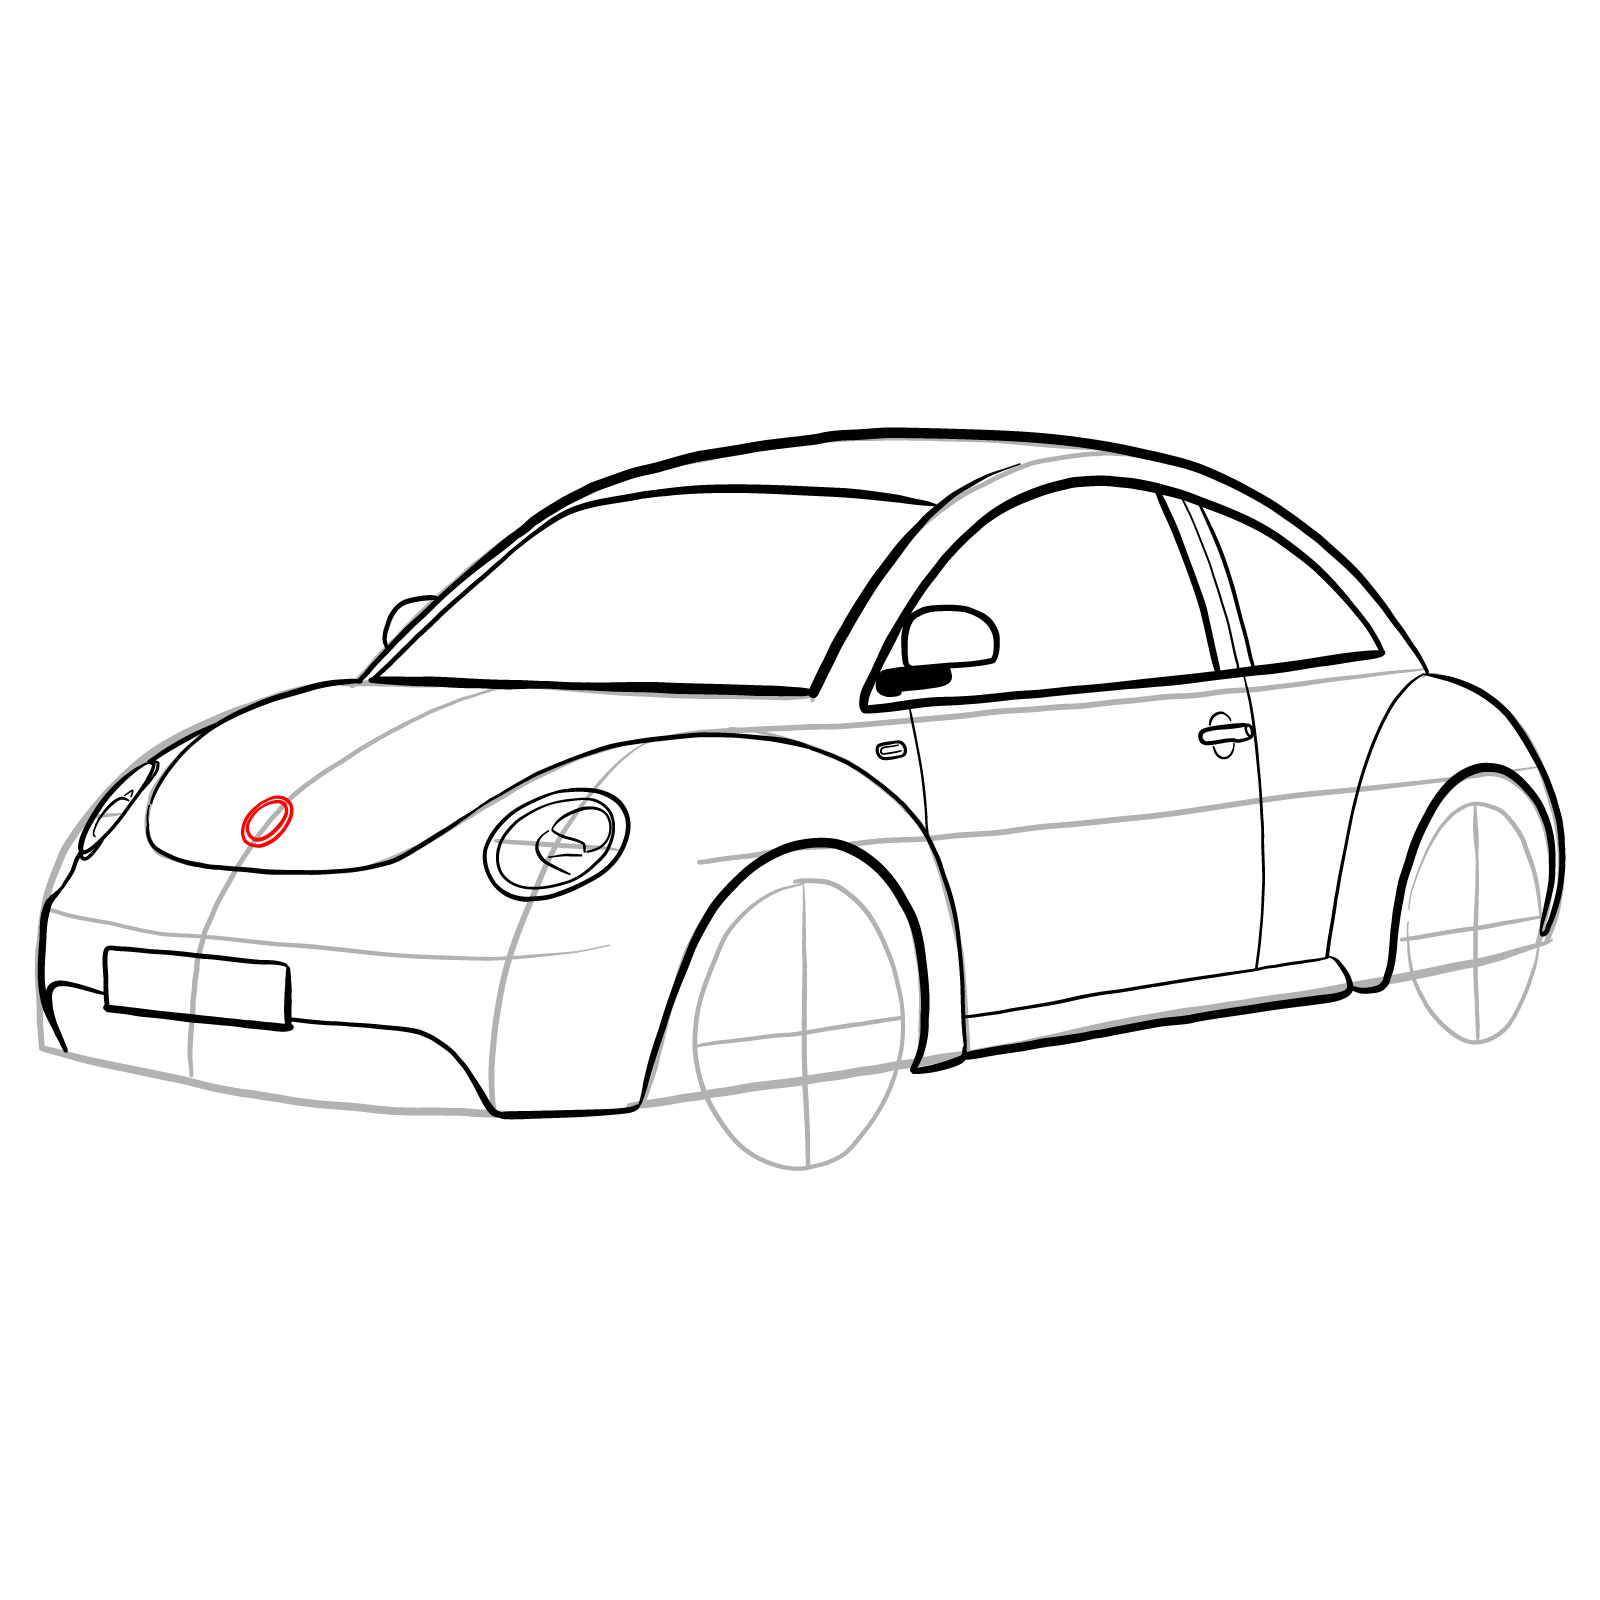 How to draw Volkswagen New Beetle - step 22